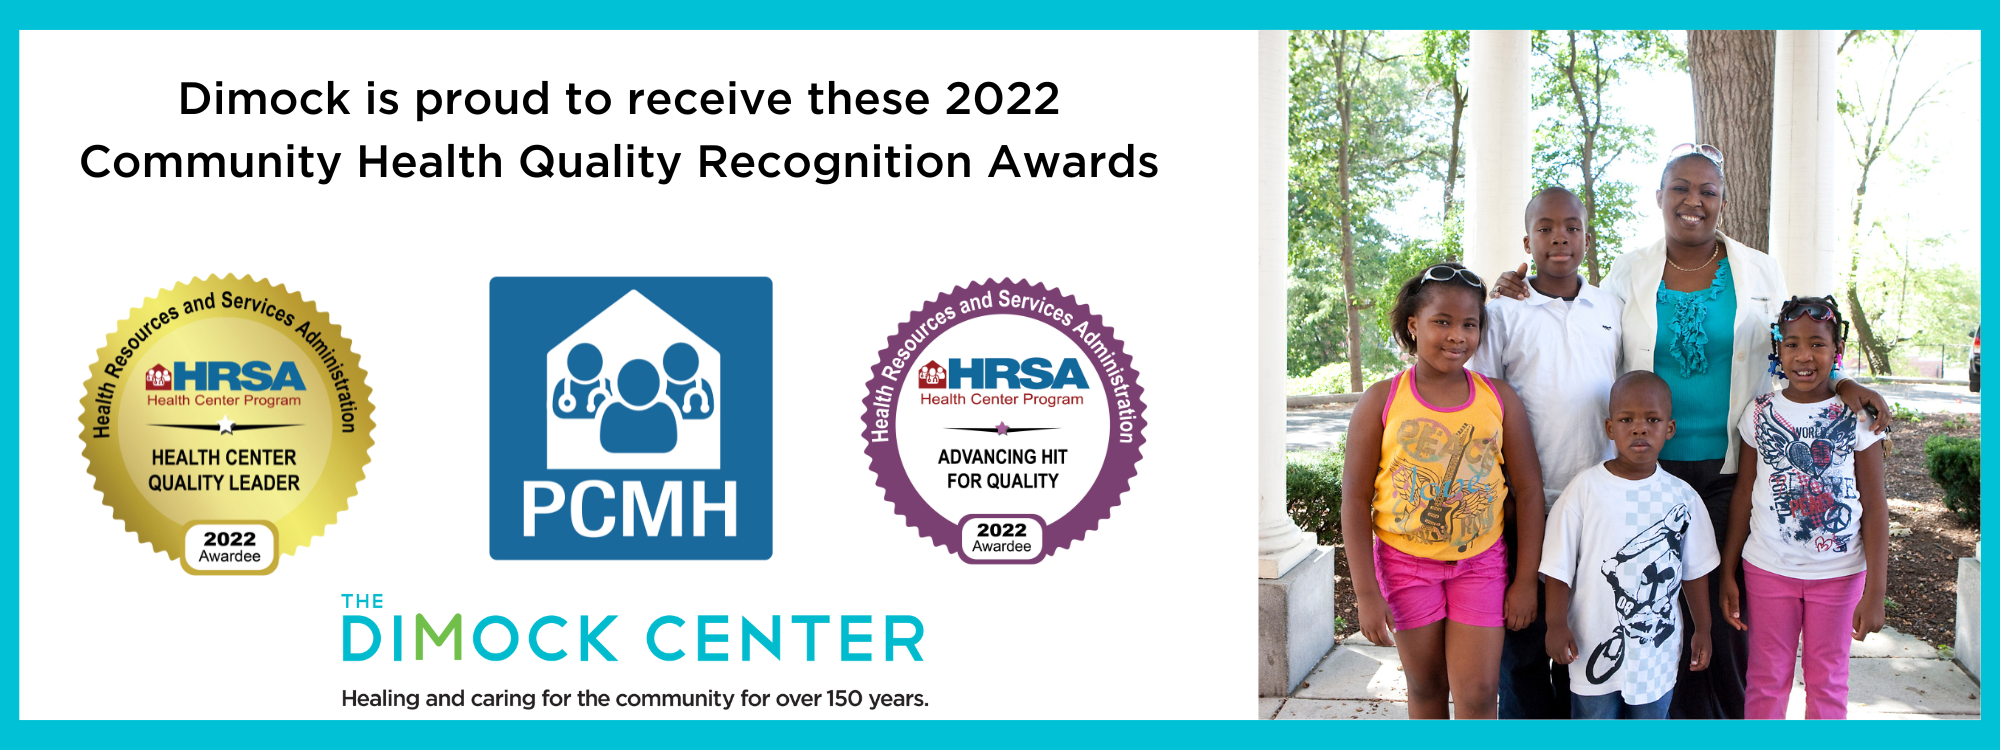 Dimock awarded 3 Community Health Quality Recognition Awards